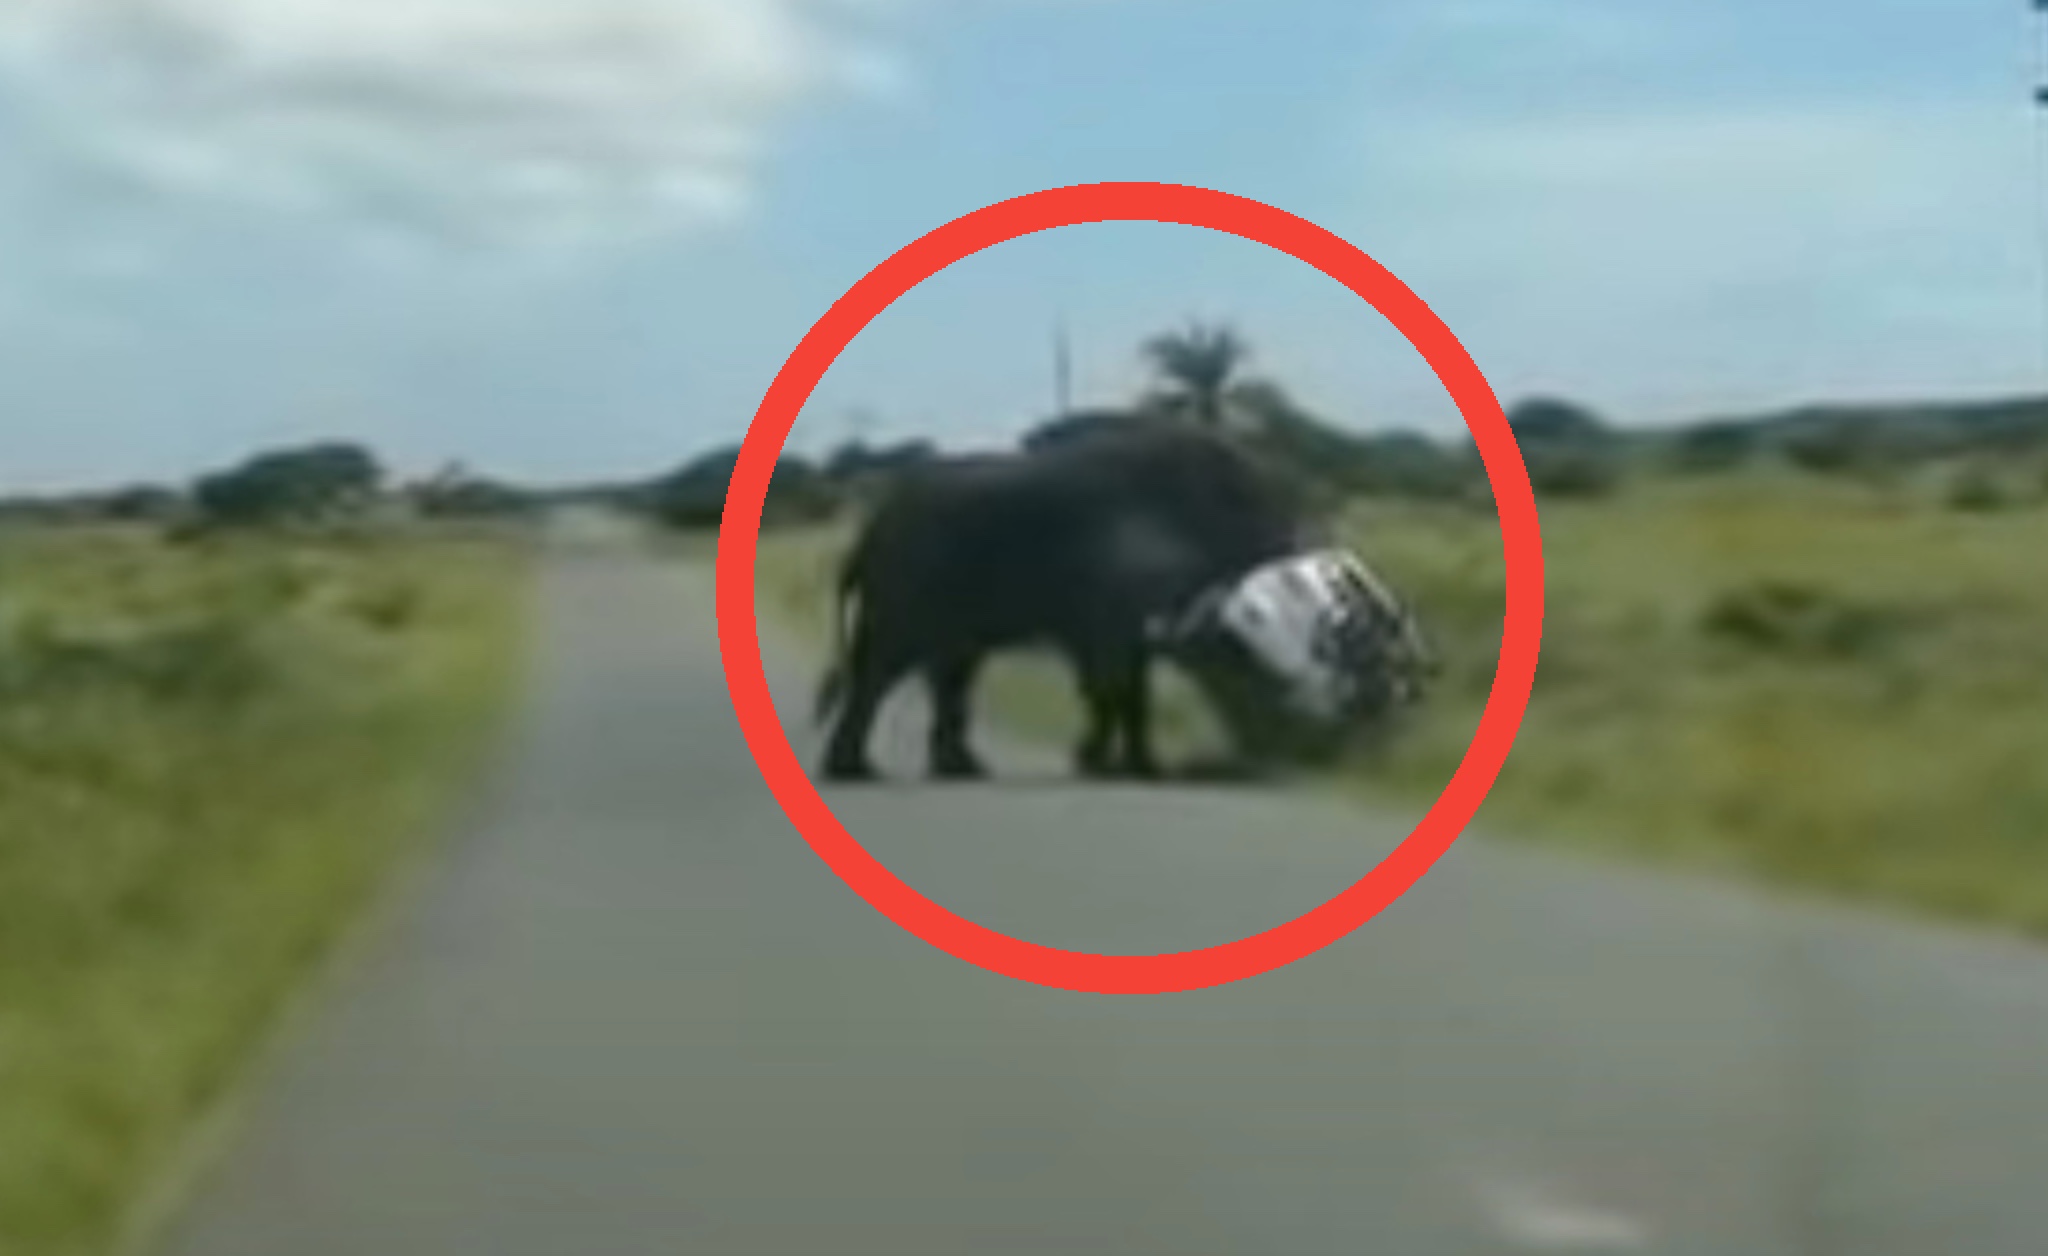 VIDEO: South African Elephant Flips SUV With Family of 4